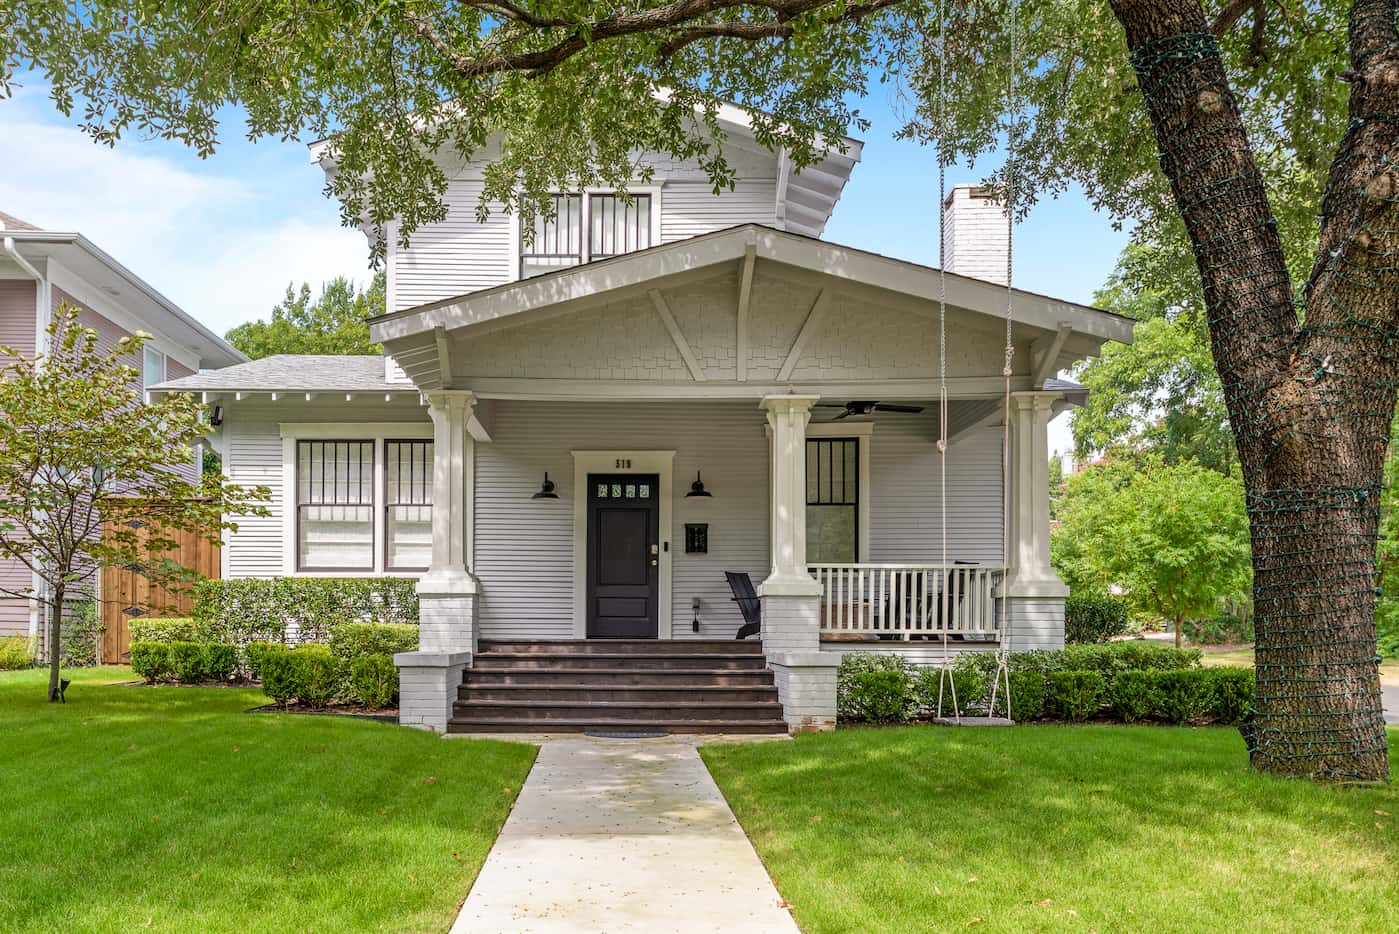 A look at 319 N. Edgefield Avenue in Dallas, one of the houses on the 2019 Heritage Oak...